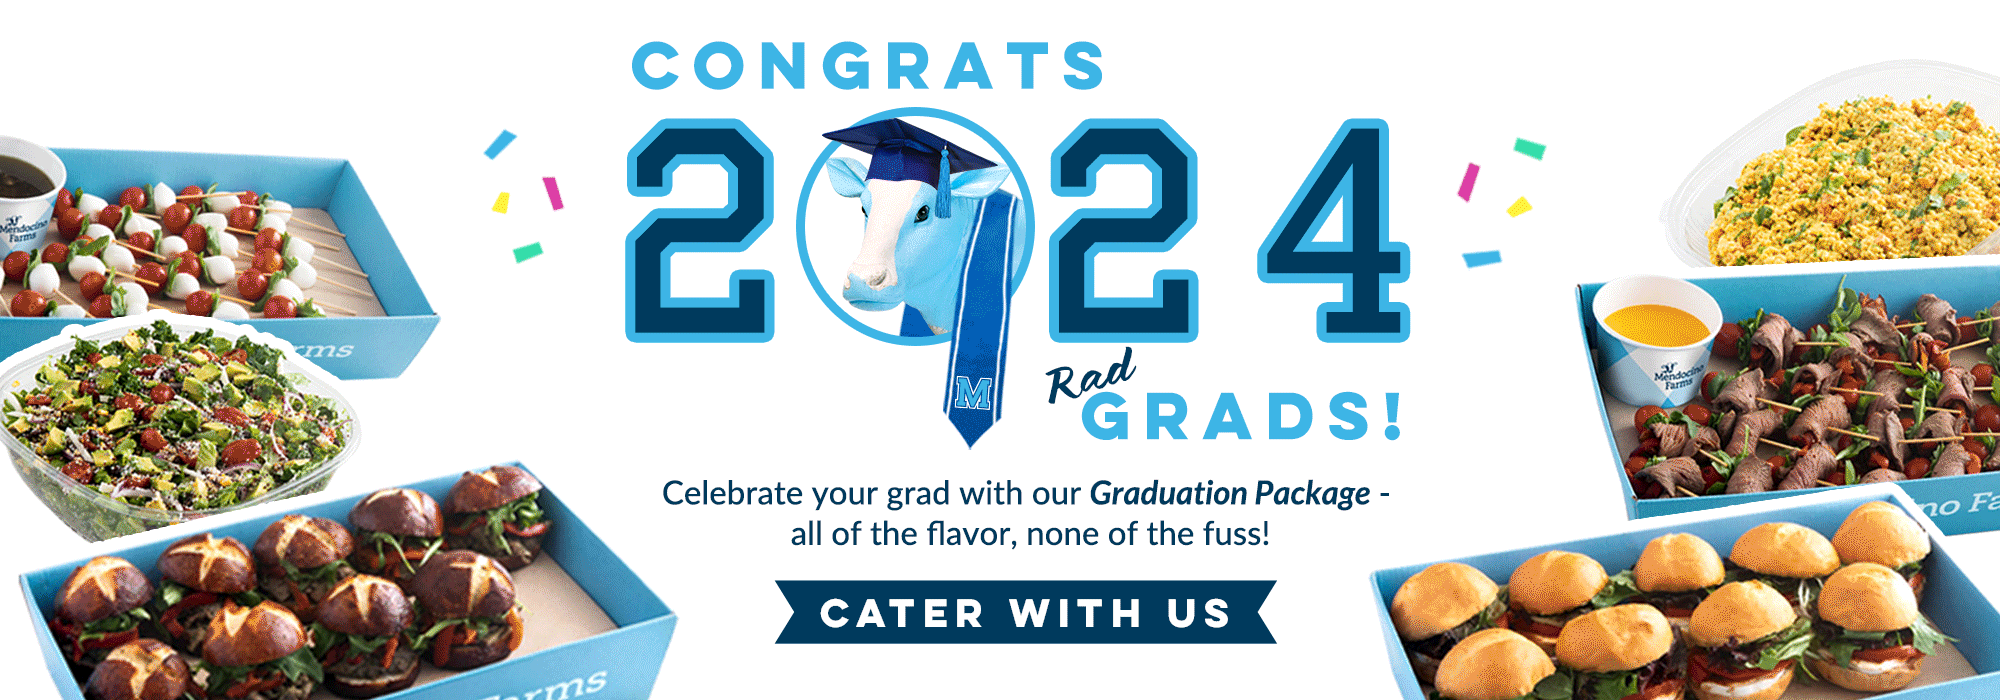 Celebrate your graduate and cater with us